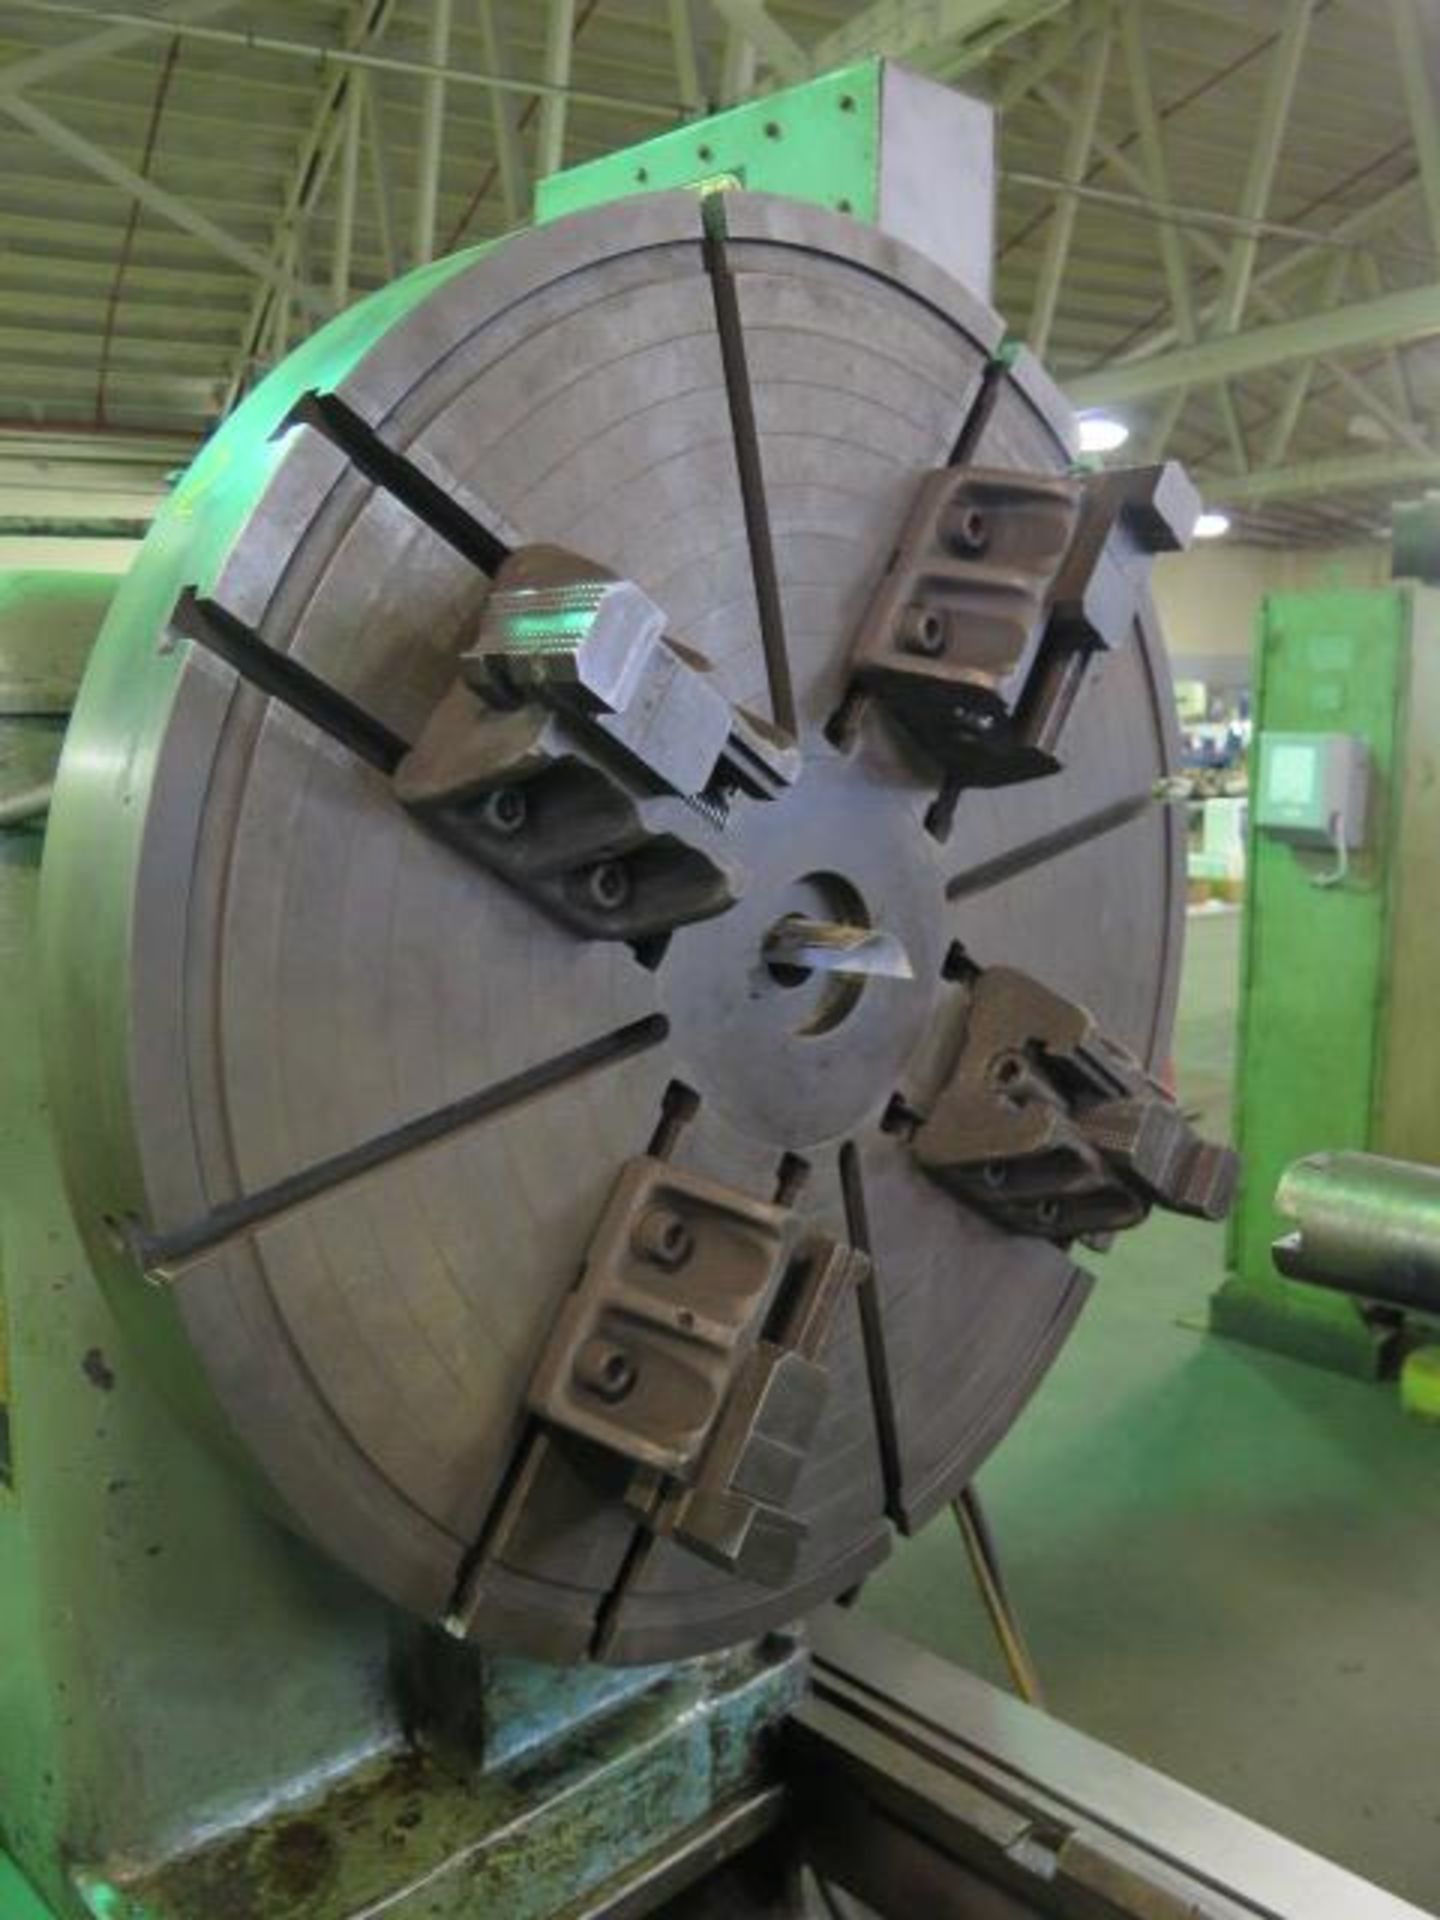 Niles A54P 62” x 140” Lathe s/n 23579 w/ 3.94-232 RPM, Inch Threading, Steady Rest, SOLD AS IS - Image 4 of 20